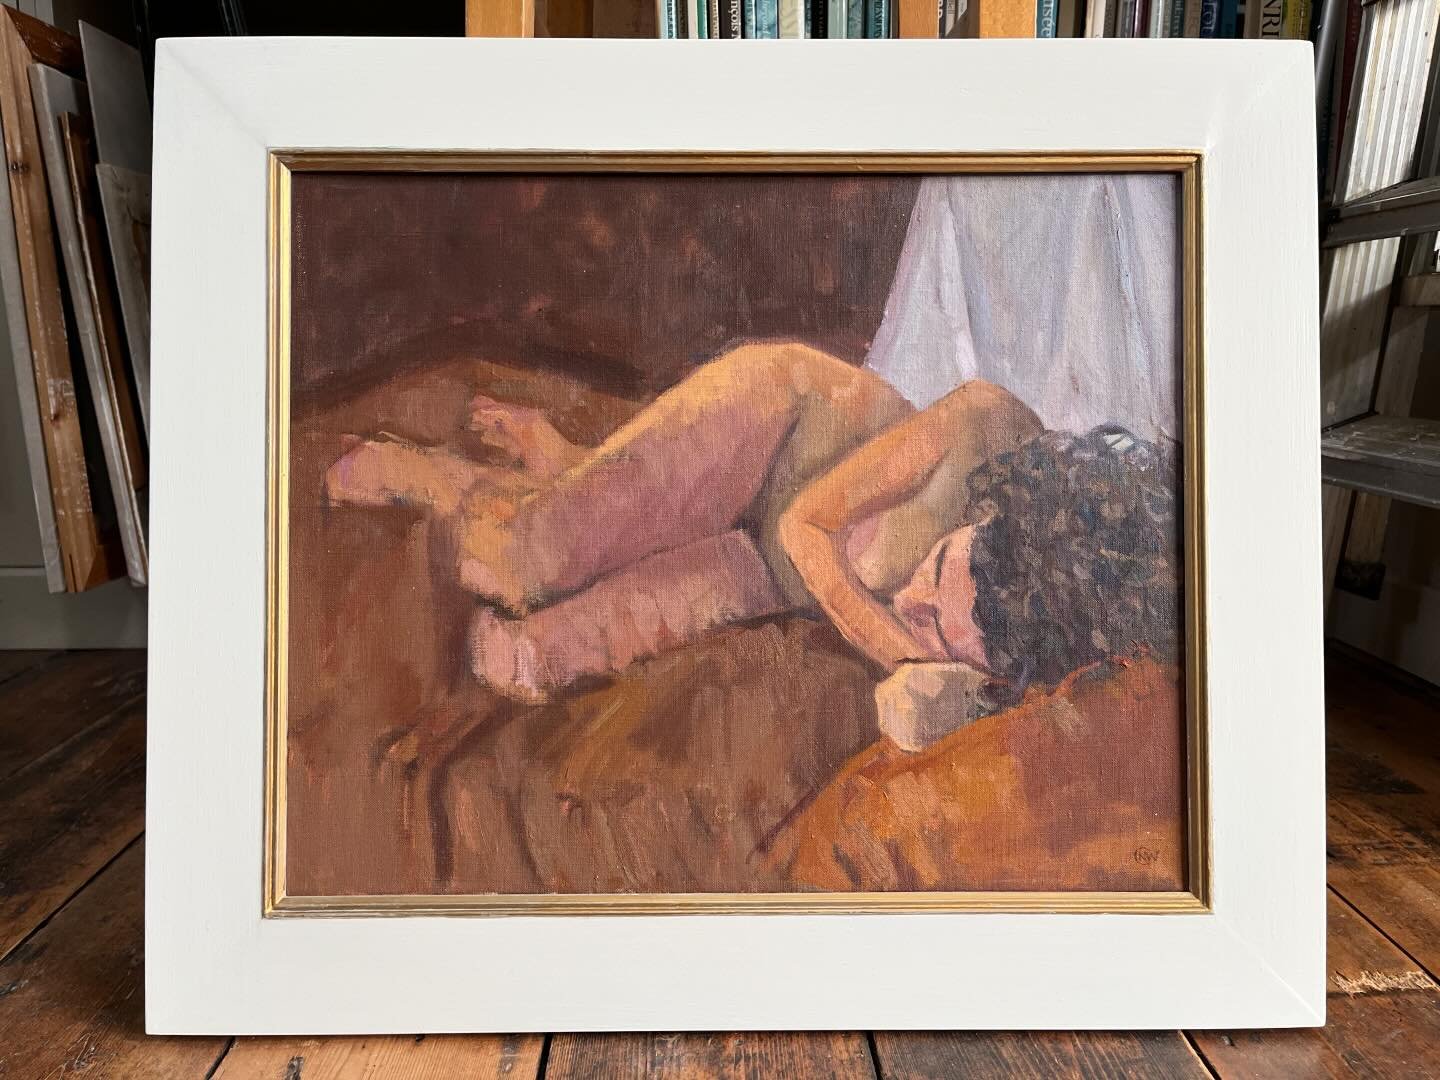 Reclining nude, Oil on canvas, 16 x 20 inches. Repainted the frame with a bit of gold and off white, previously a brown grey. This was painted a few years ago at Heatherley&rsquo;s School in Chelsea. Please DM me if you are interested.

#life #lifecl